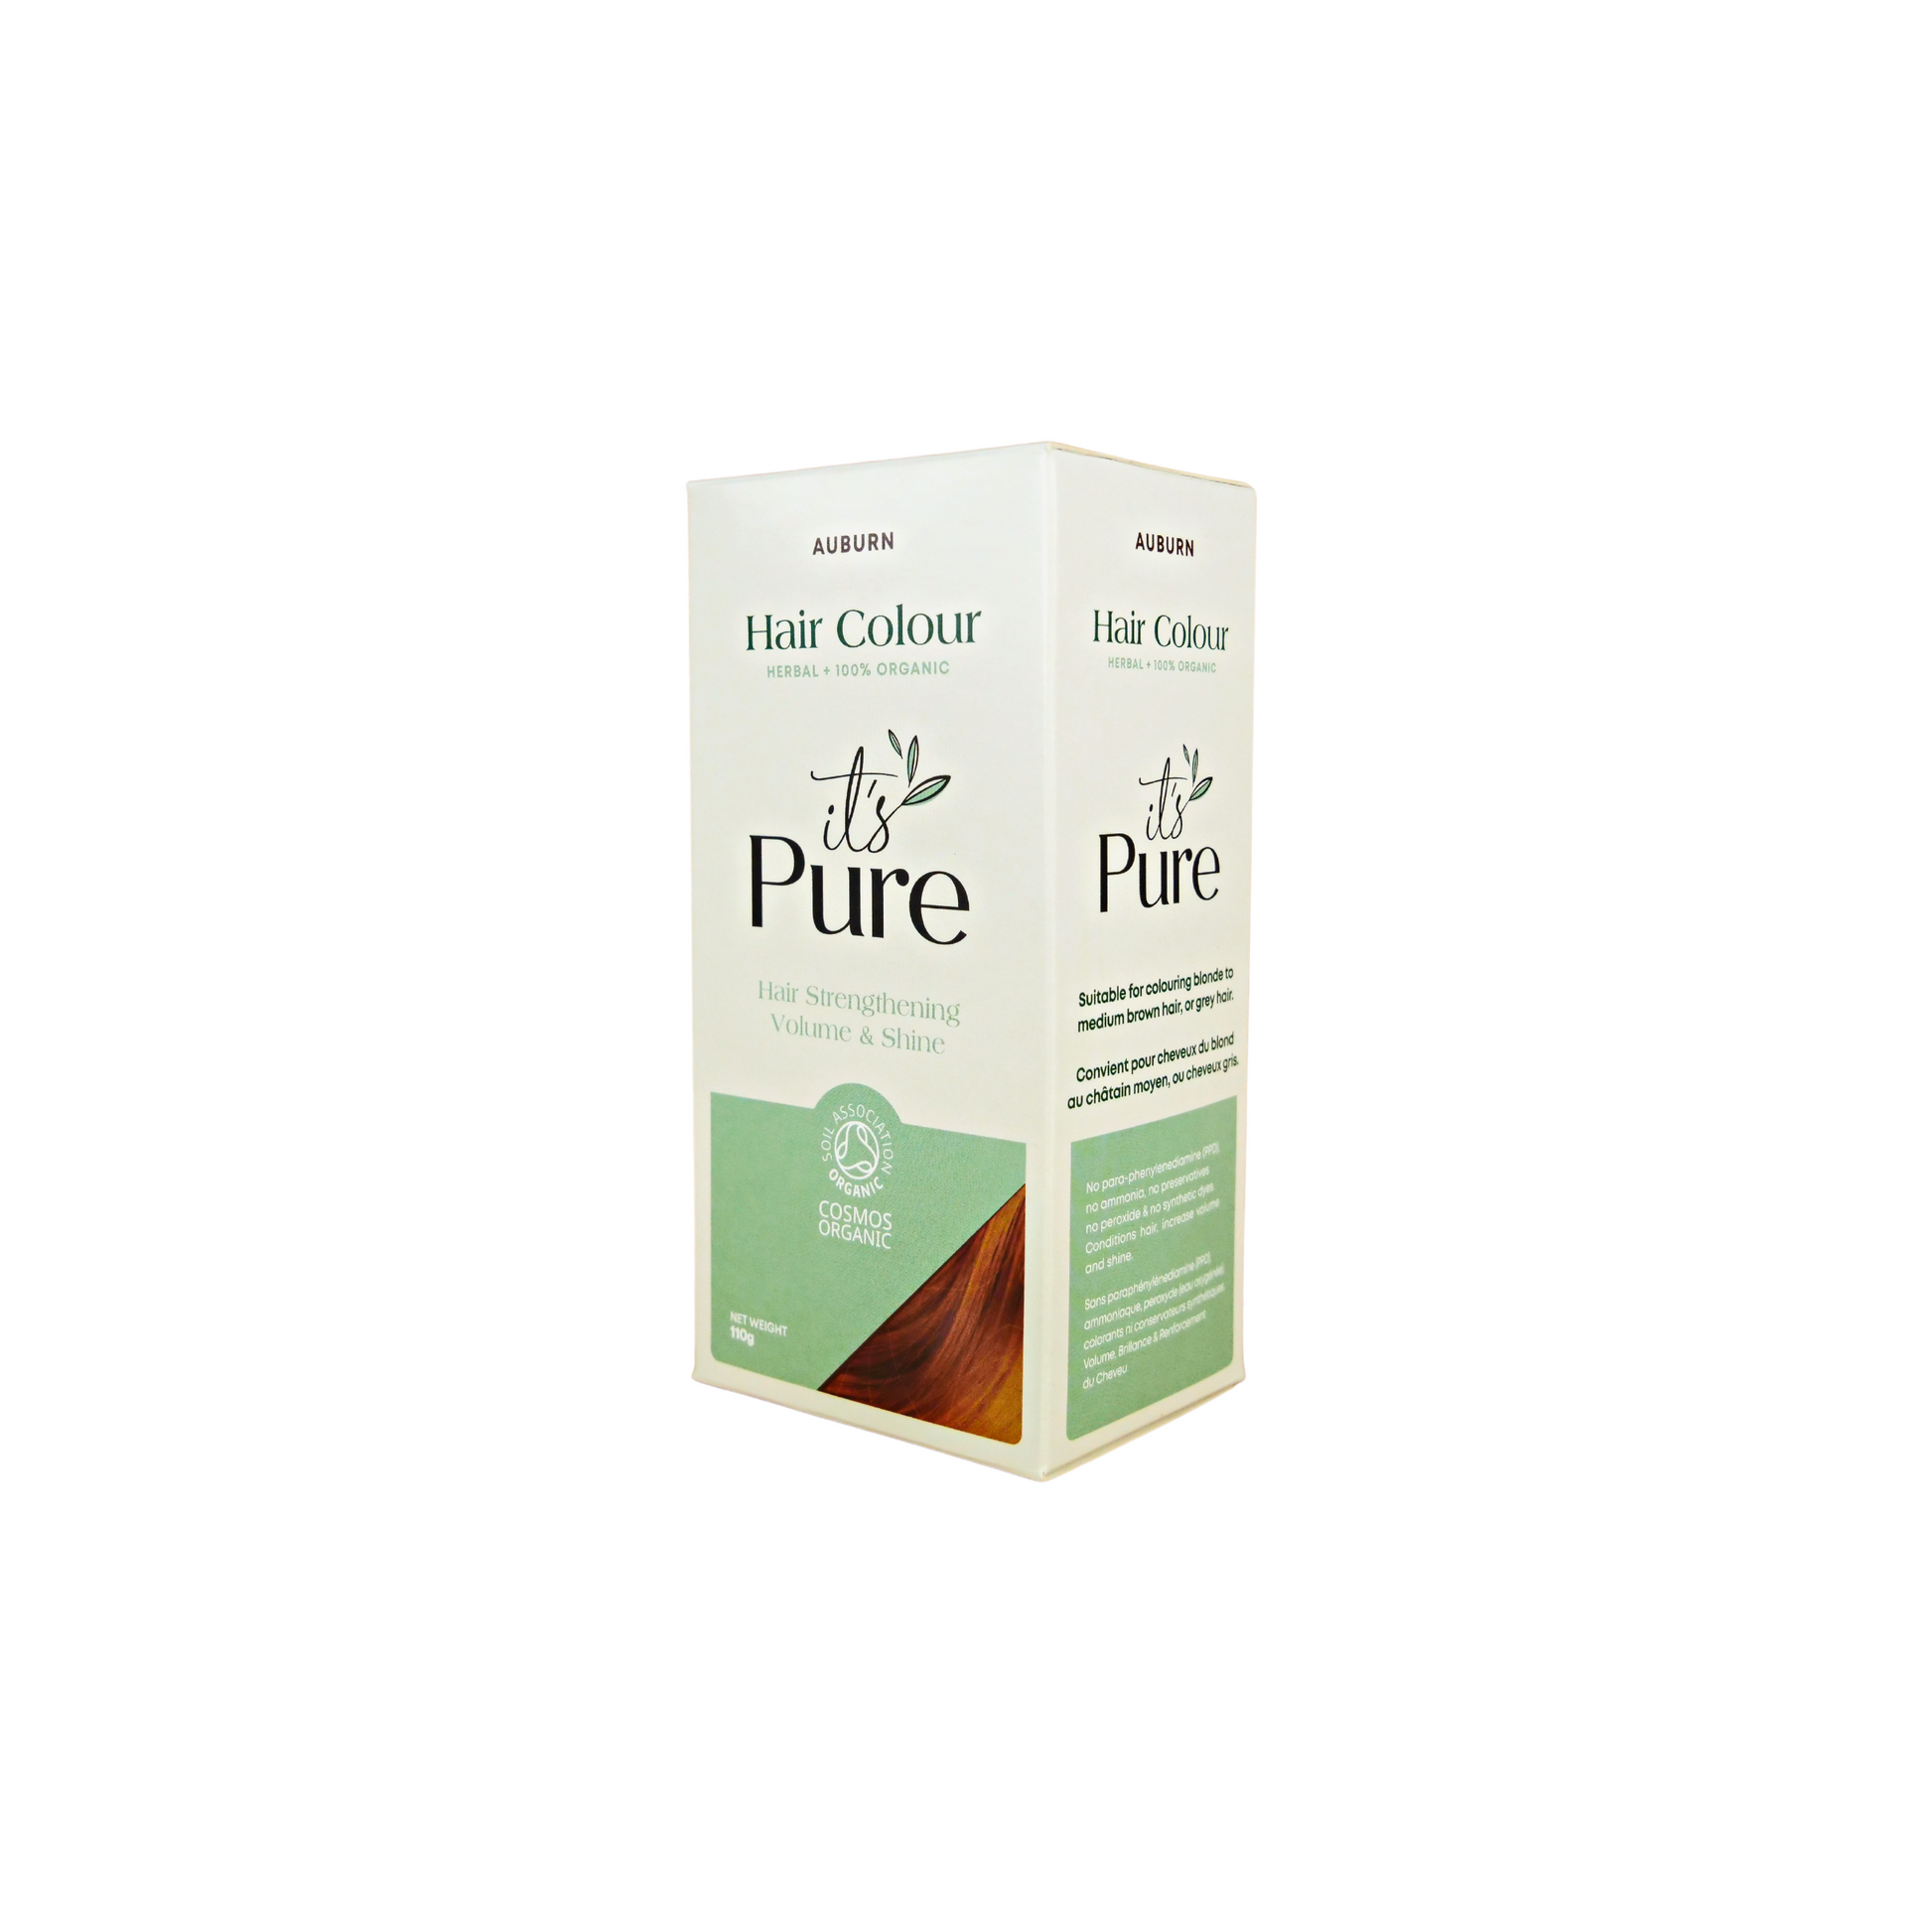 it's pure auburn semi permanent natural hair dye in light green and green box on white background